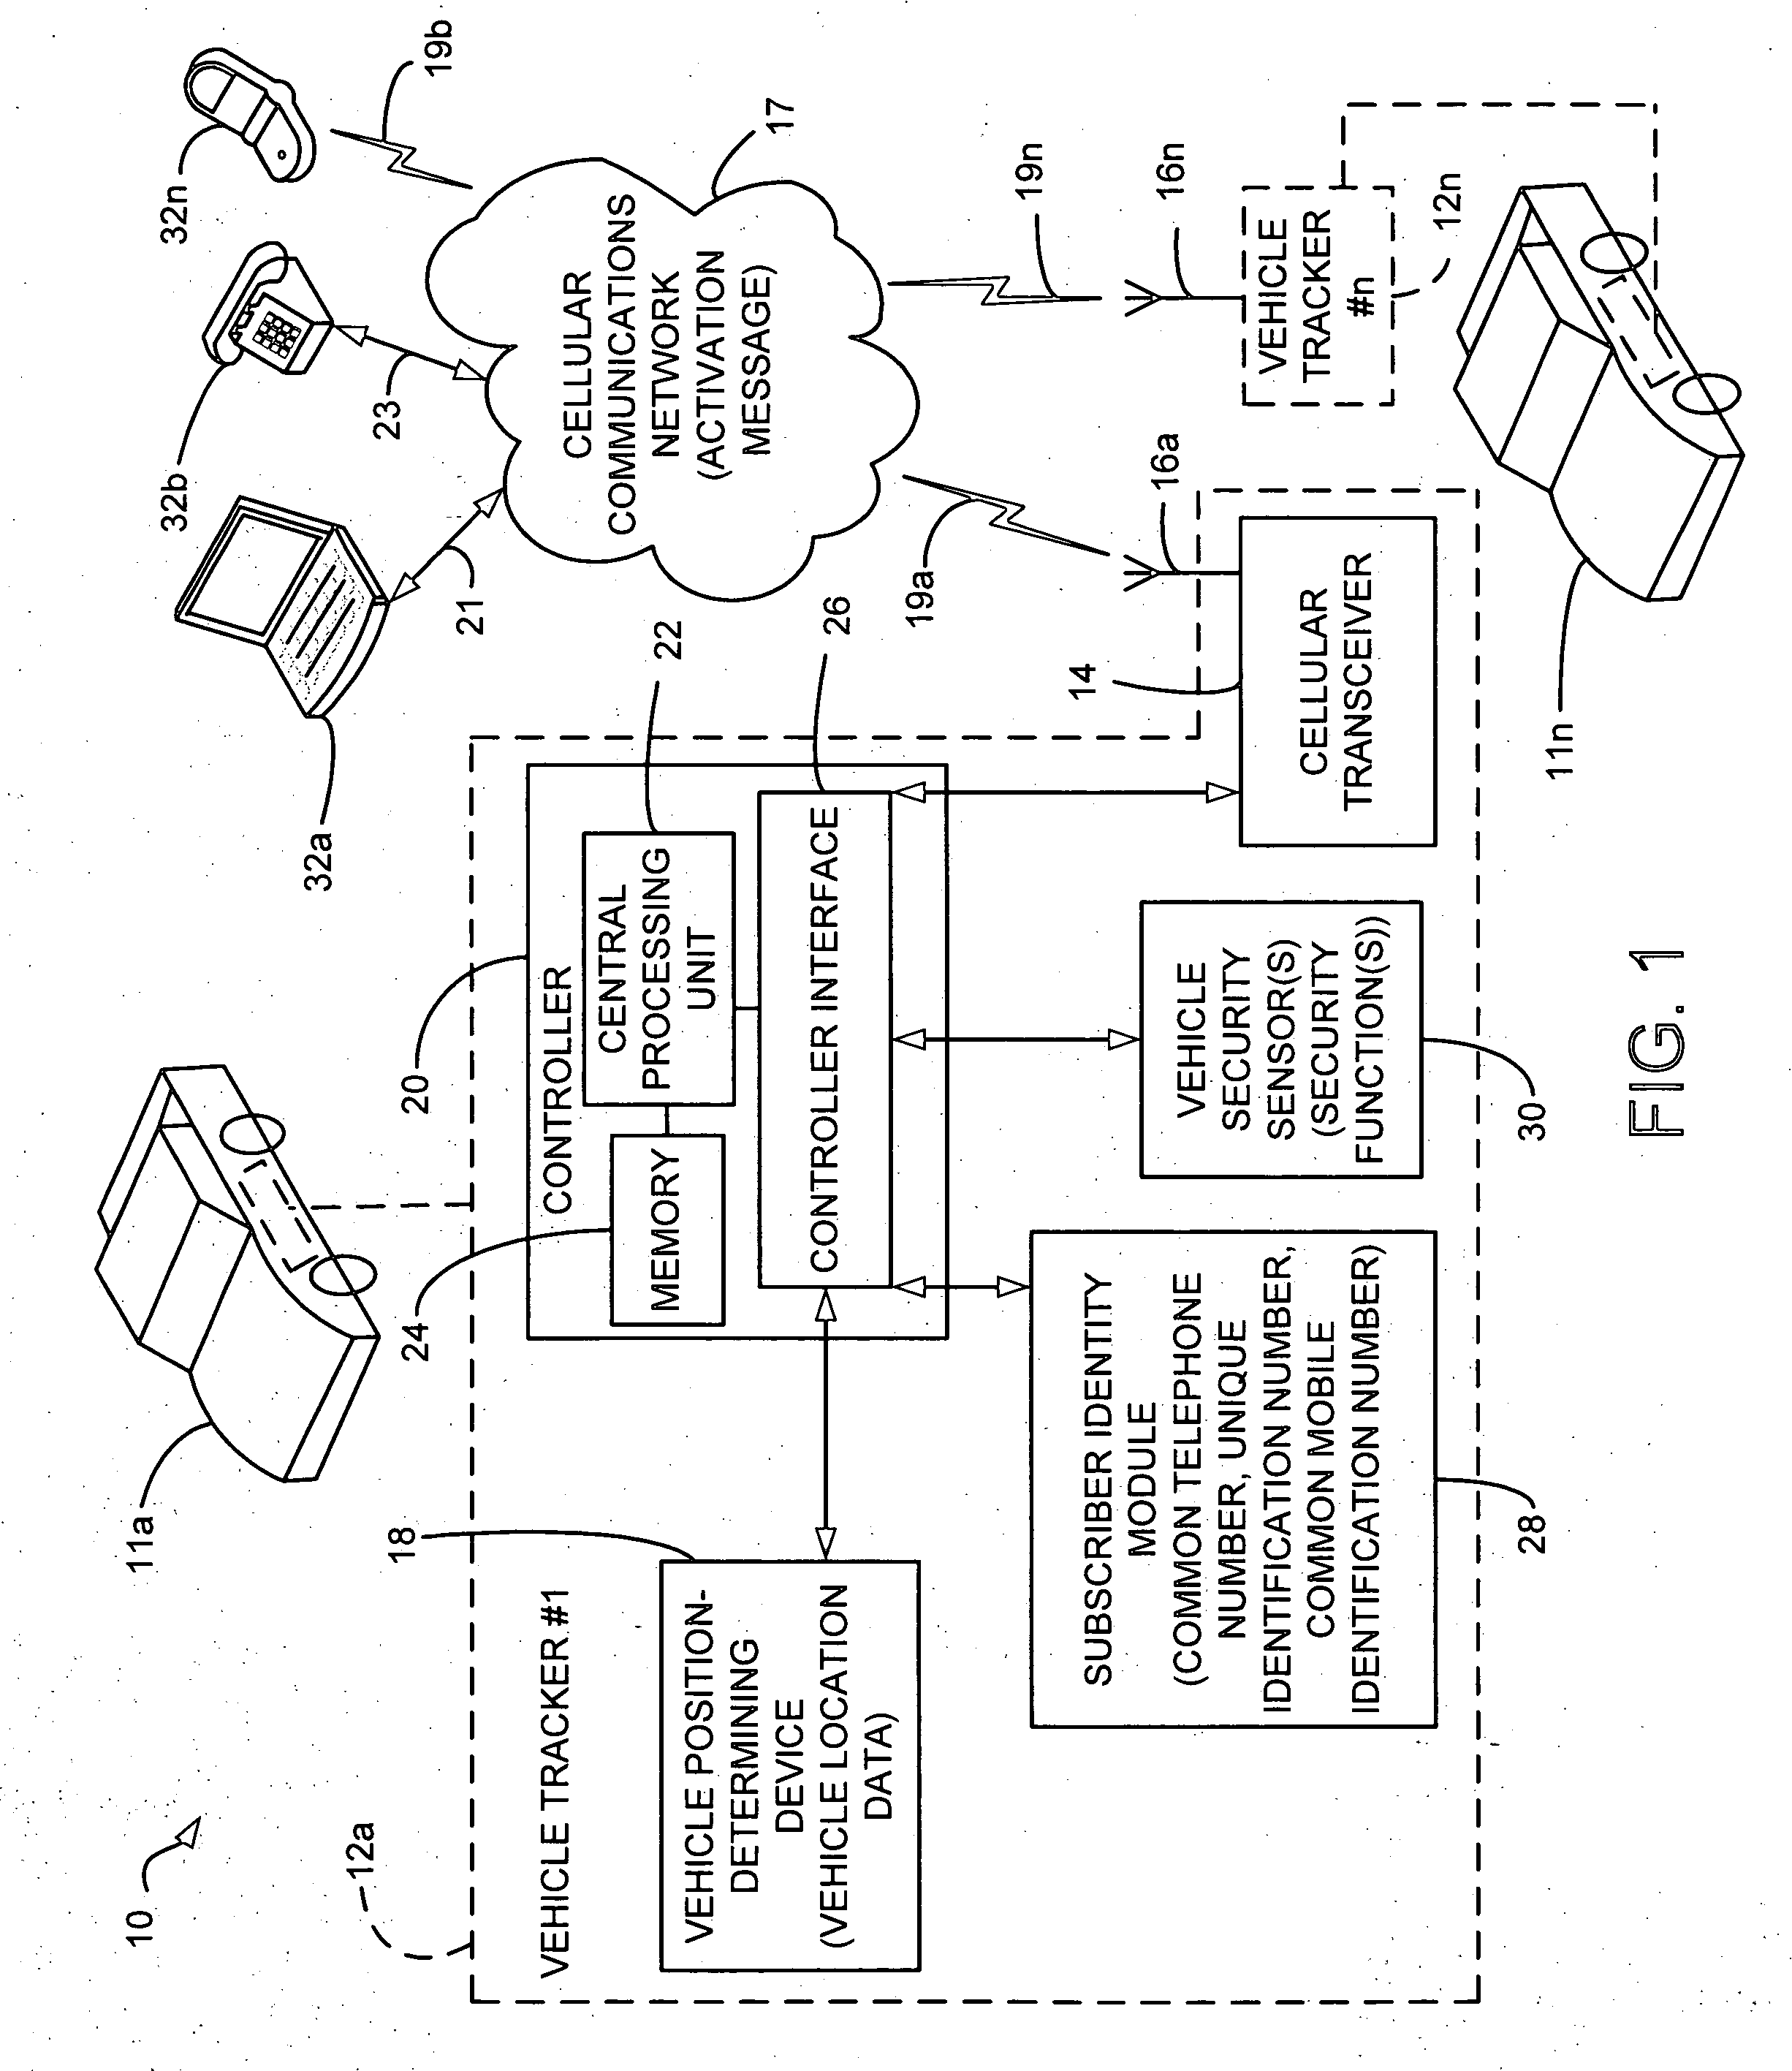 Vehicle tracker using common telephone number and unique identification number and associated methods